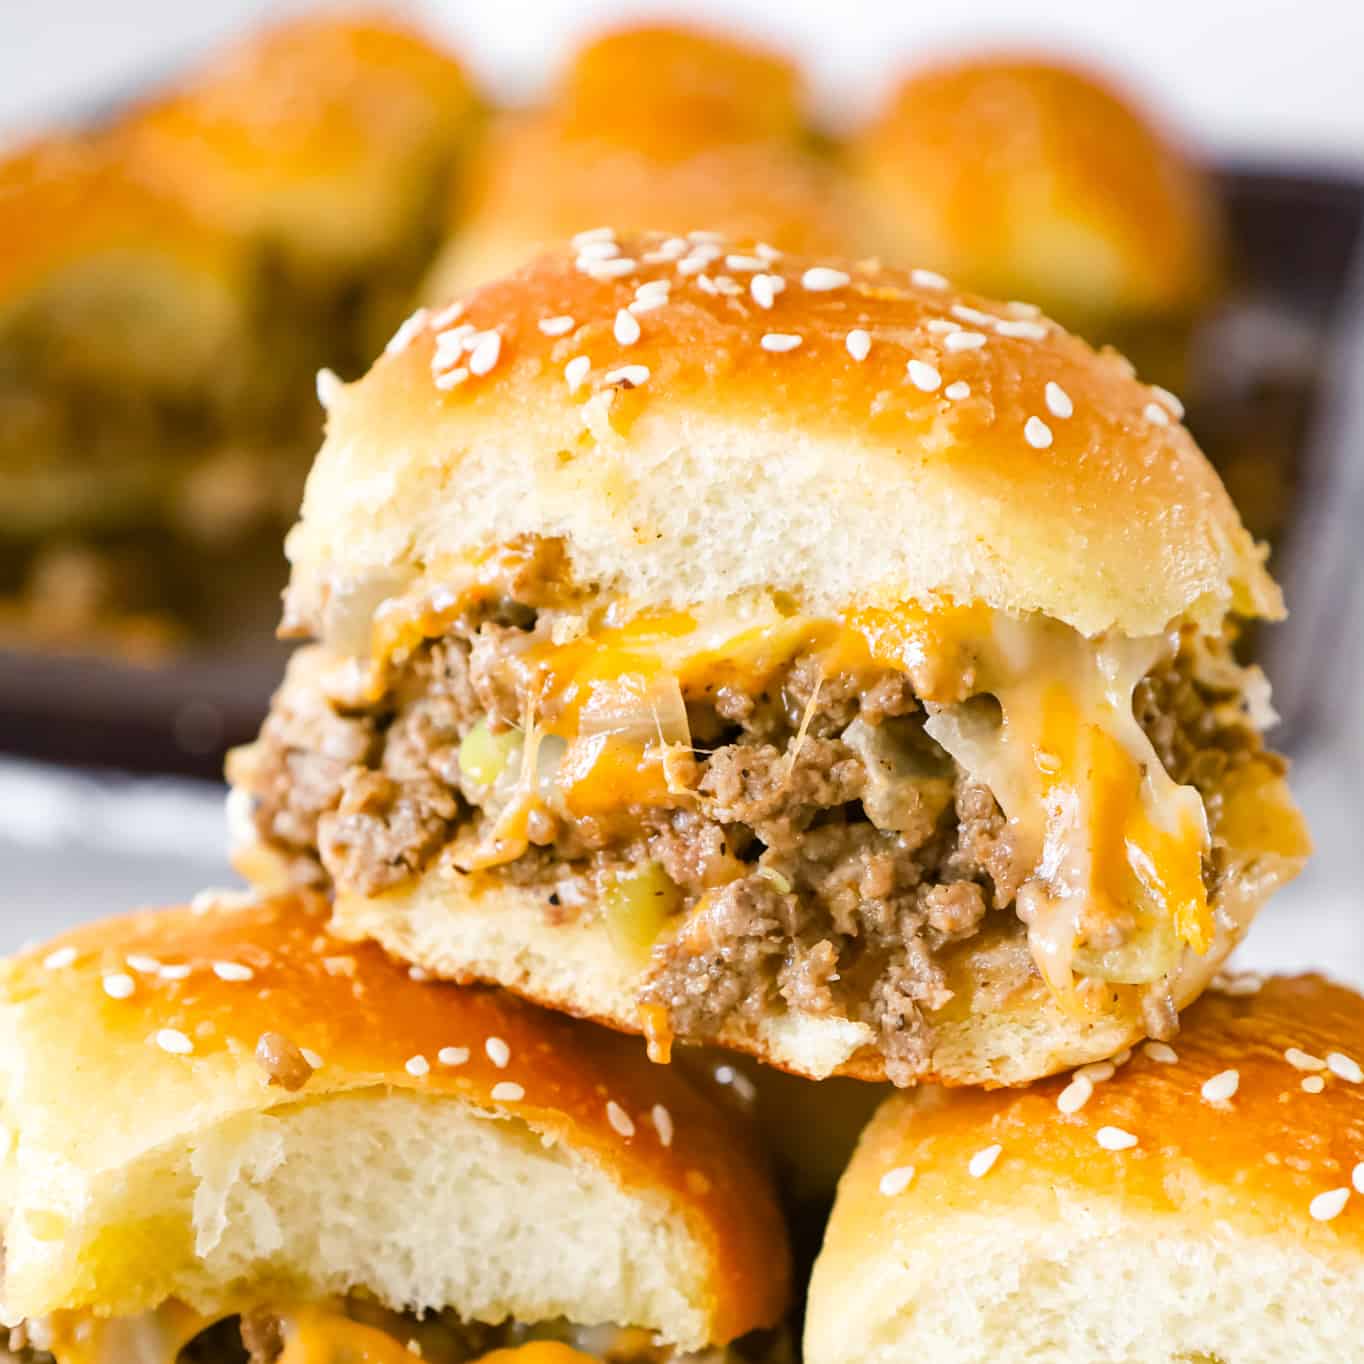 Cheeseburger Sliders are mini sandwiches made with crumbled ground beef and diced onions tossed in ketchup, mayo and mustard all loaded onto dinner rolls and topped with shredded cheese.